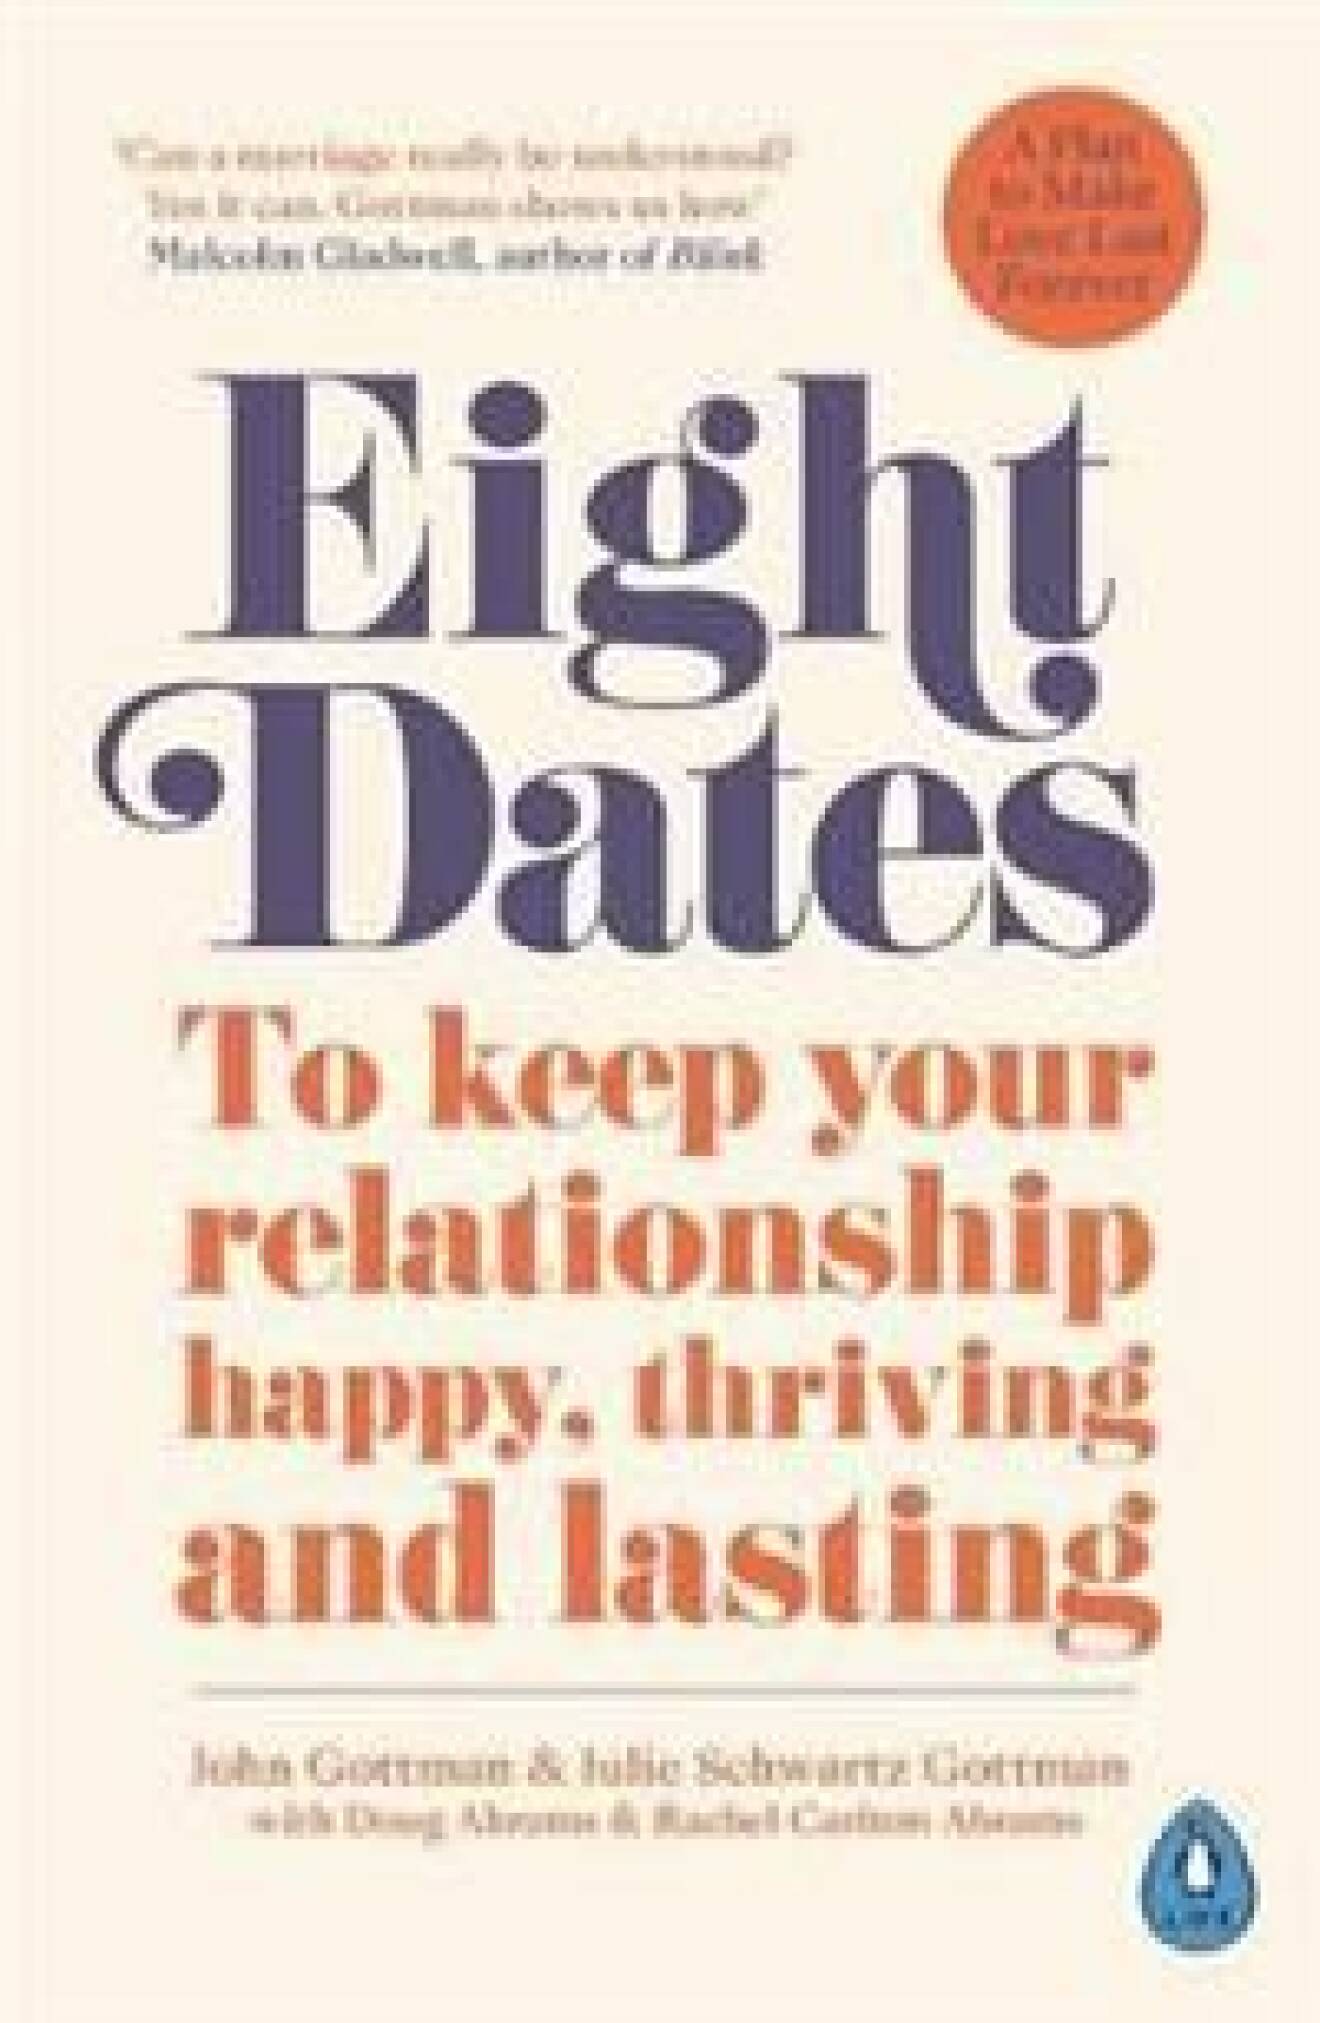 The eight dates.